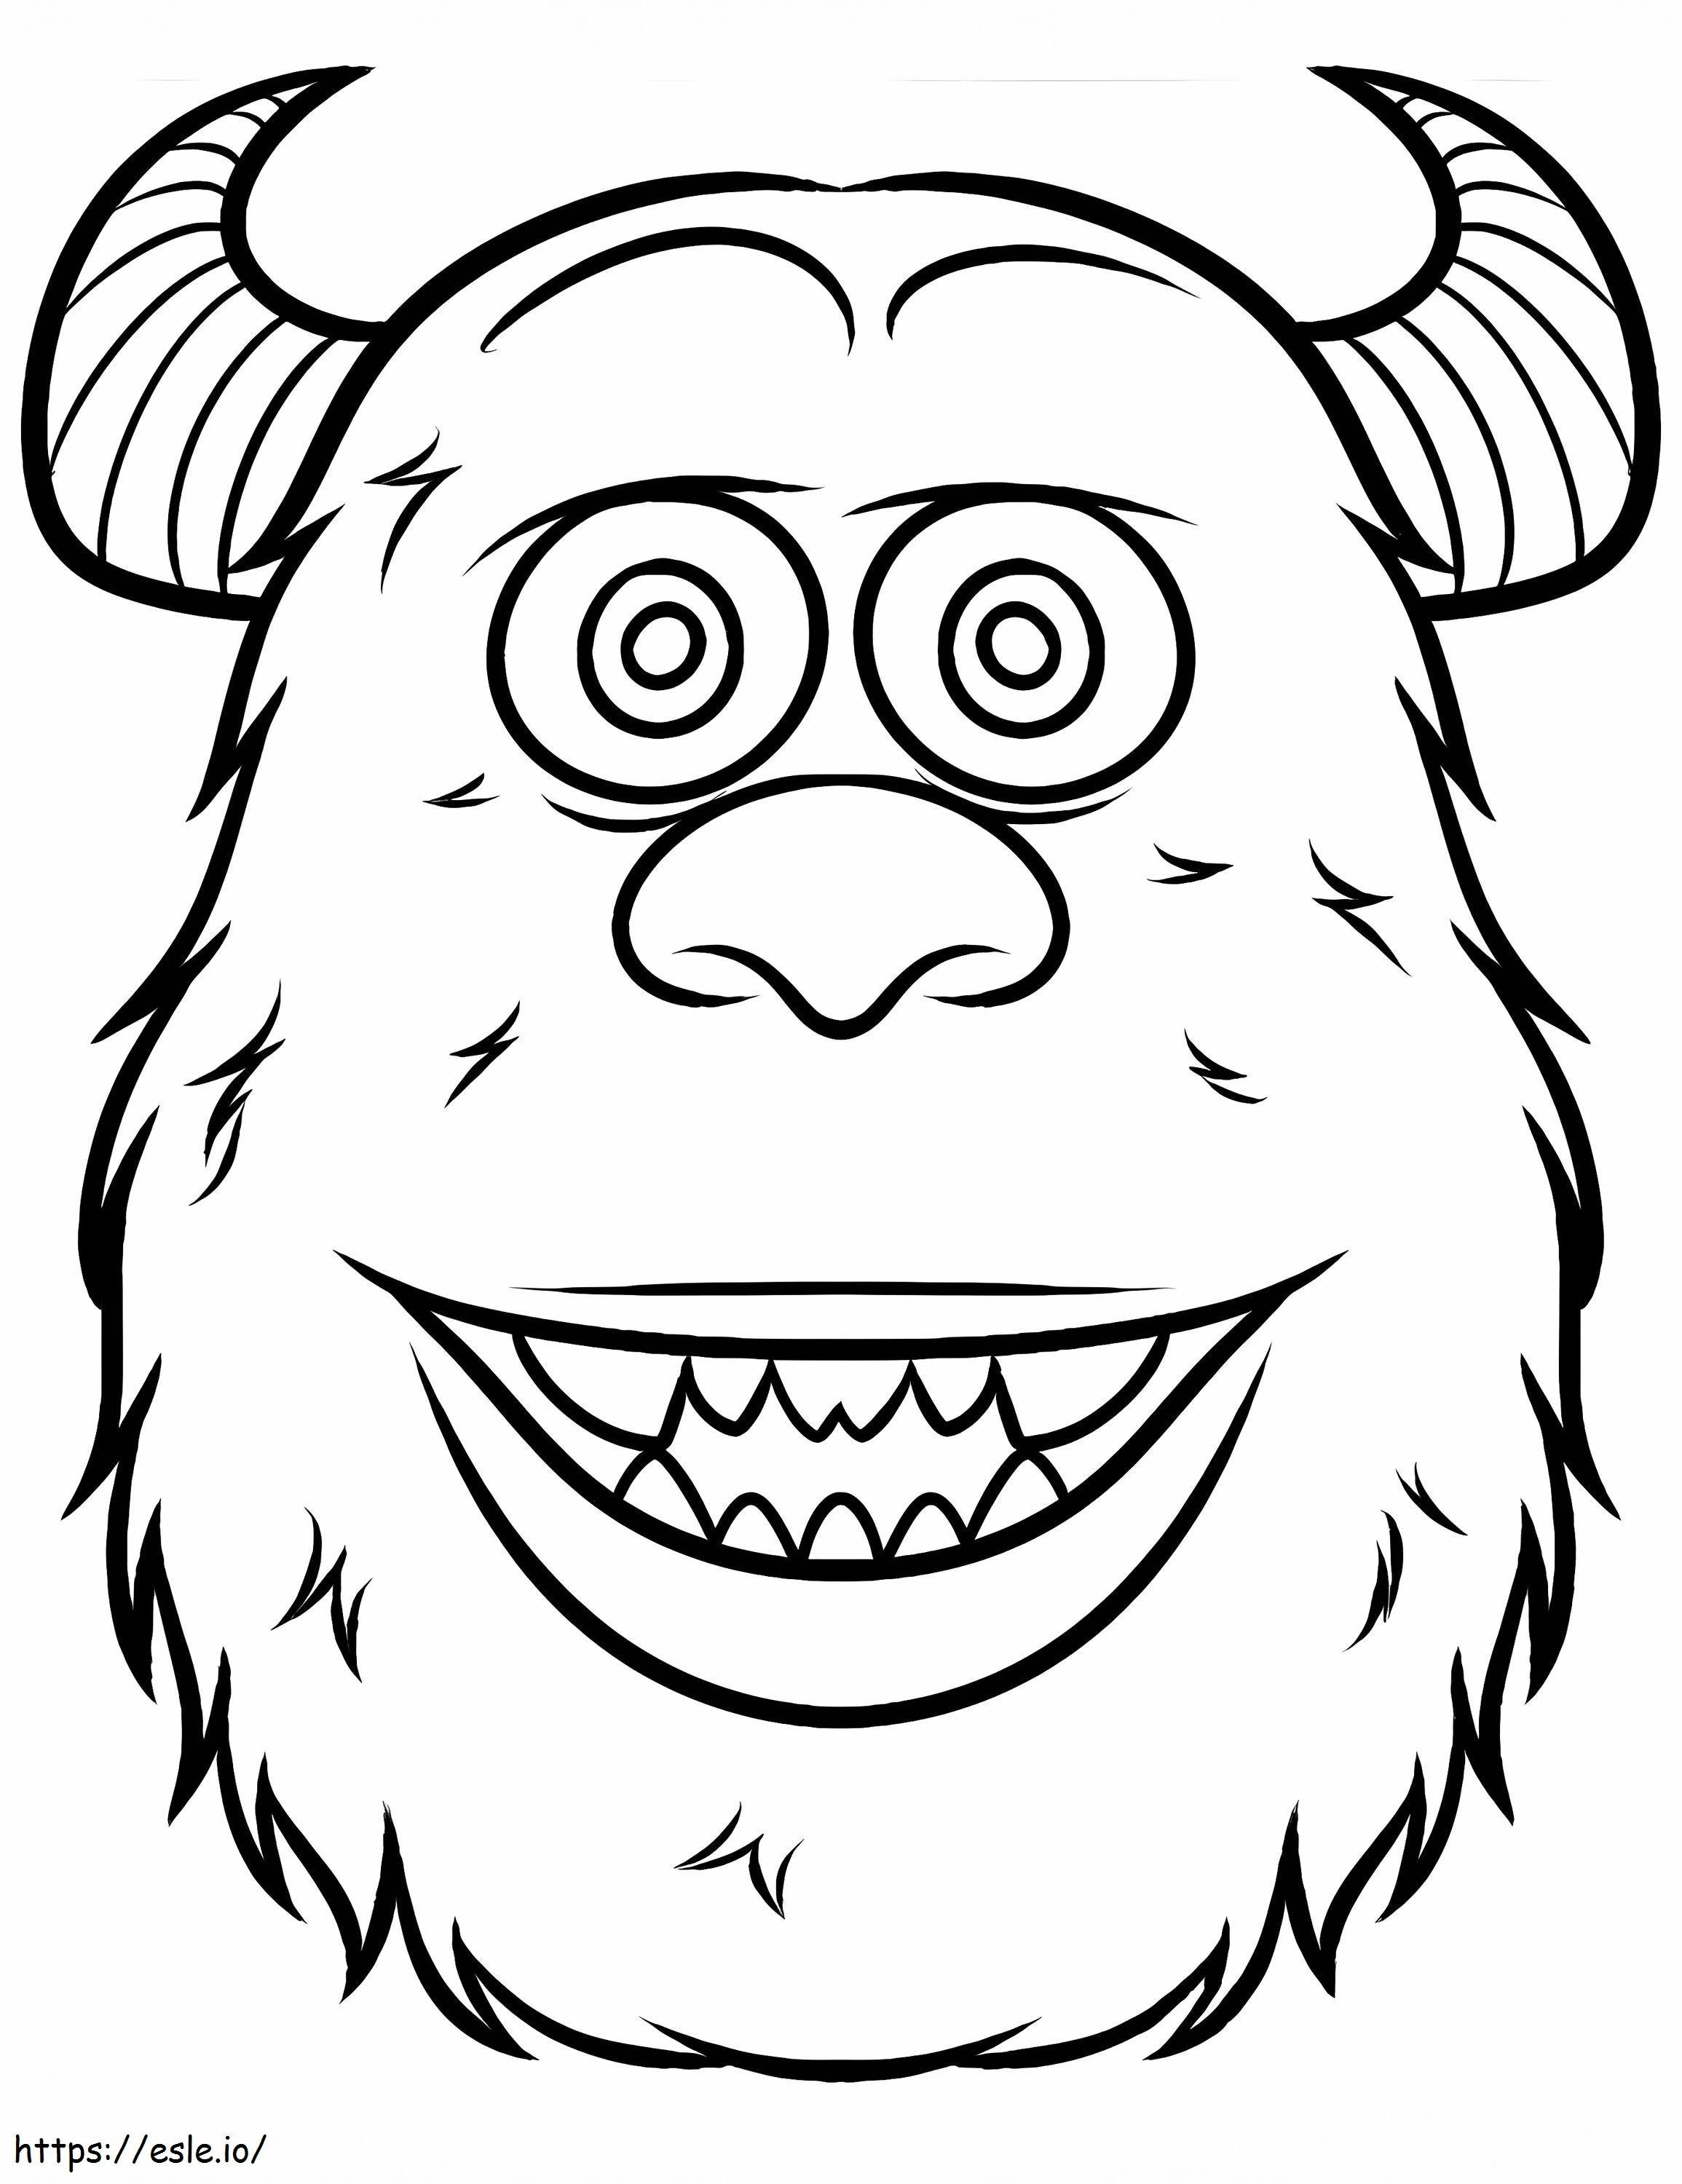 Monsters Inc Coloring Book Pages Beatiful Monsters Inc Coloring Book Pages In Monsters Inc Coloring Book Pages Print Monsters University 17 Gif coloring page